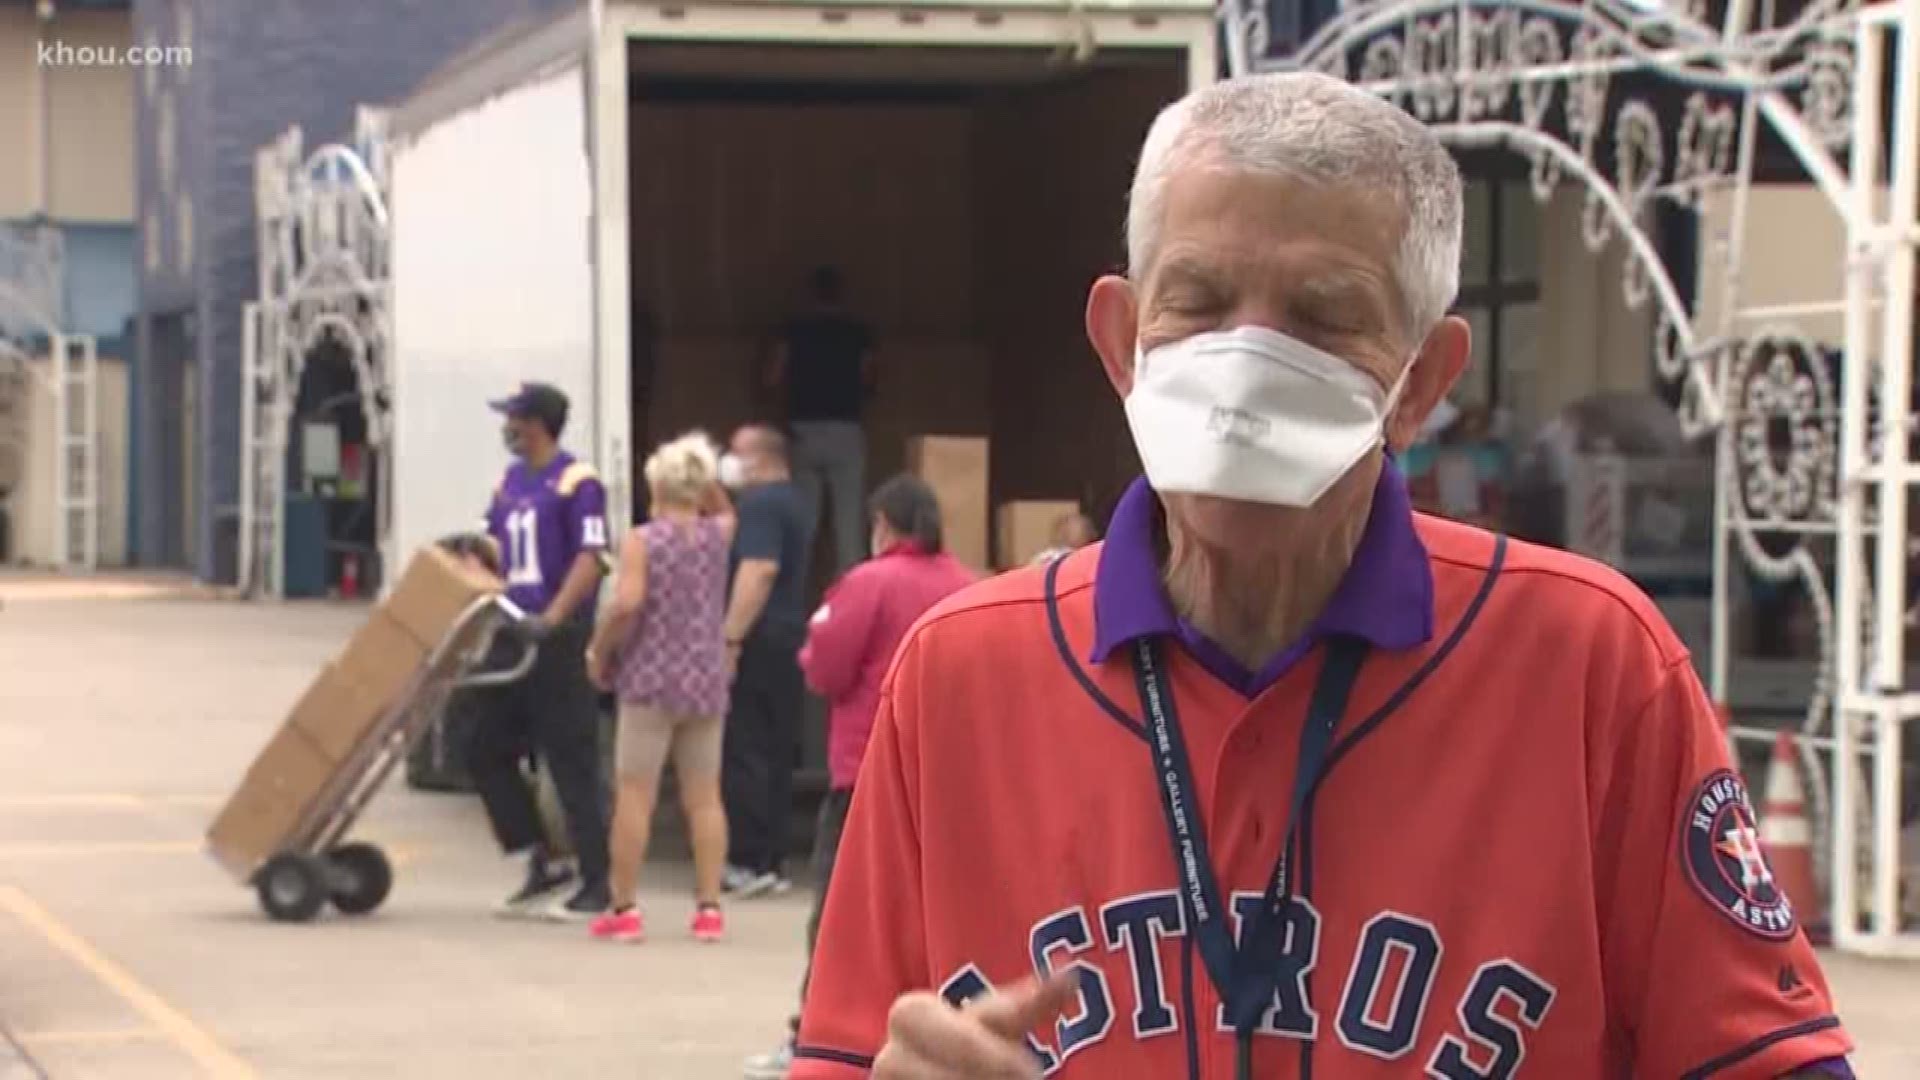 The Houston icon thanked the hundreds of volunteers who showed up to his North Freeway store to deliver care packages to home-bound seniors all across the city.